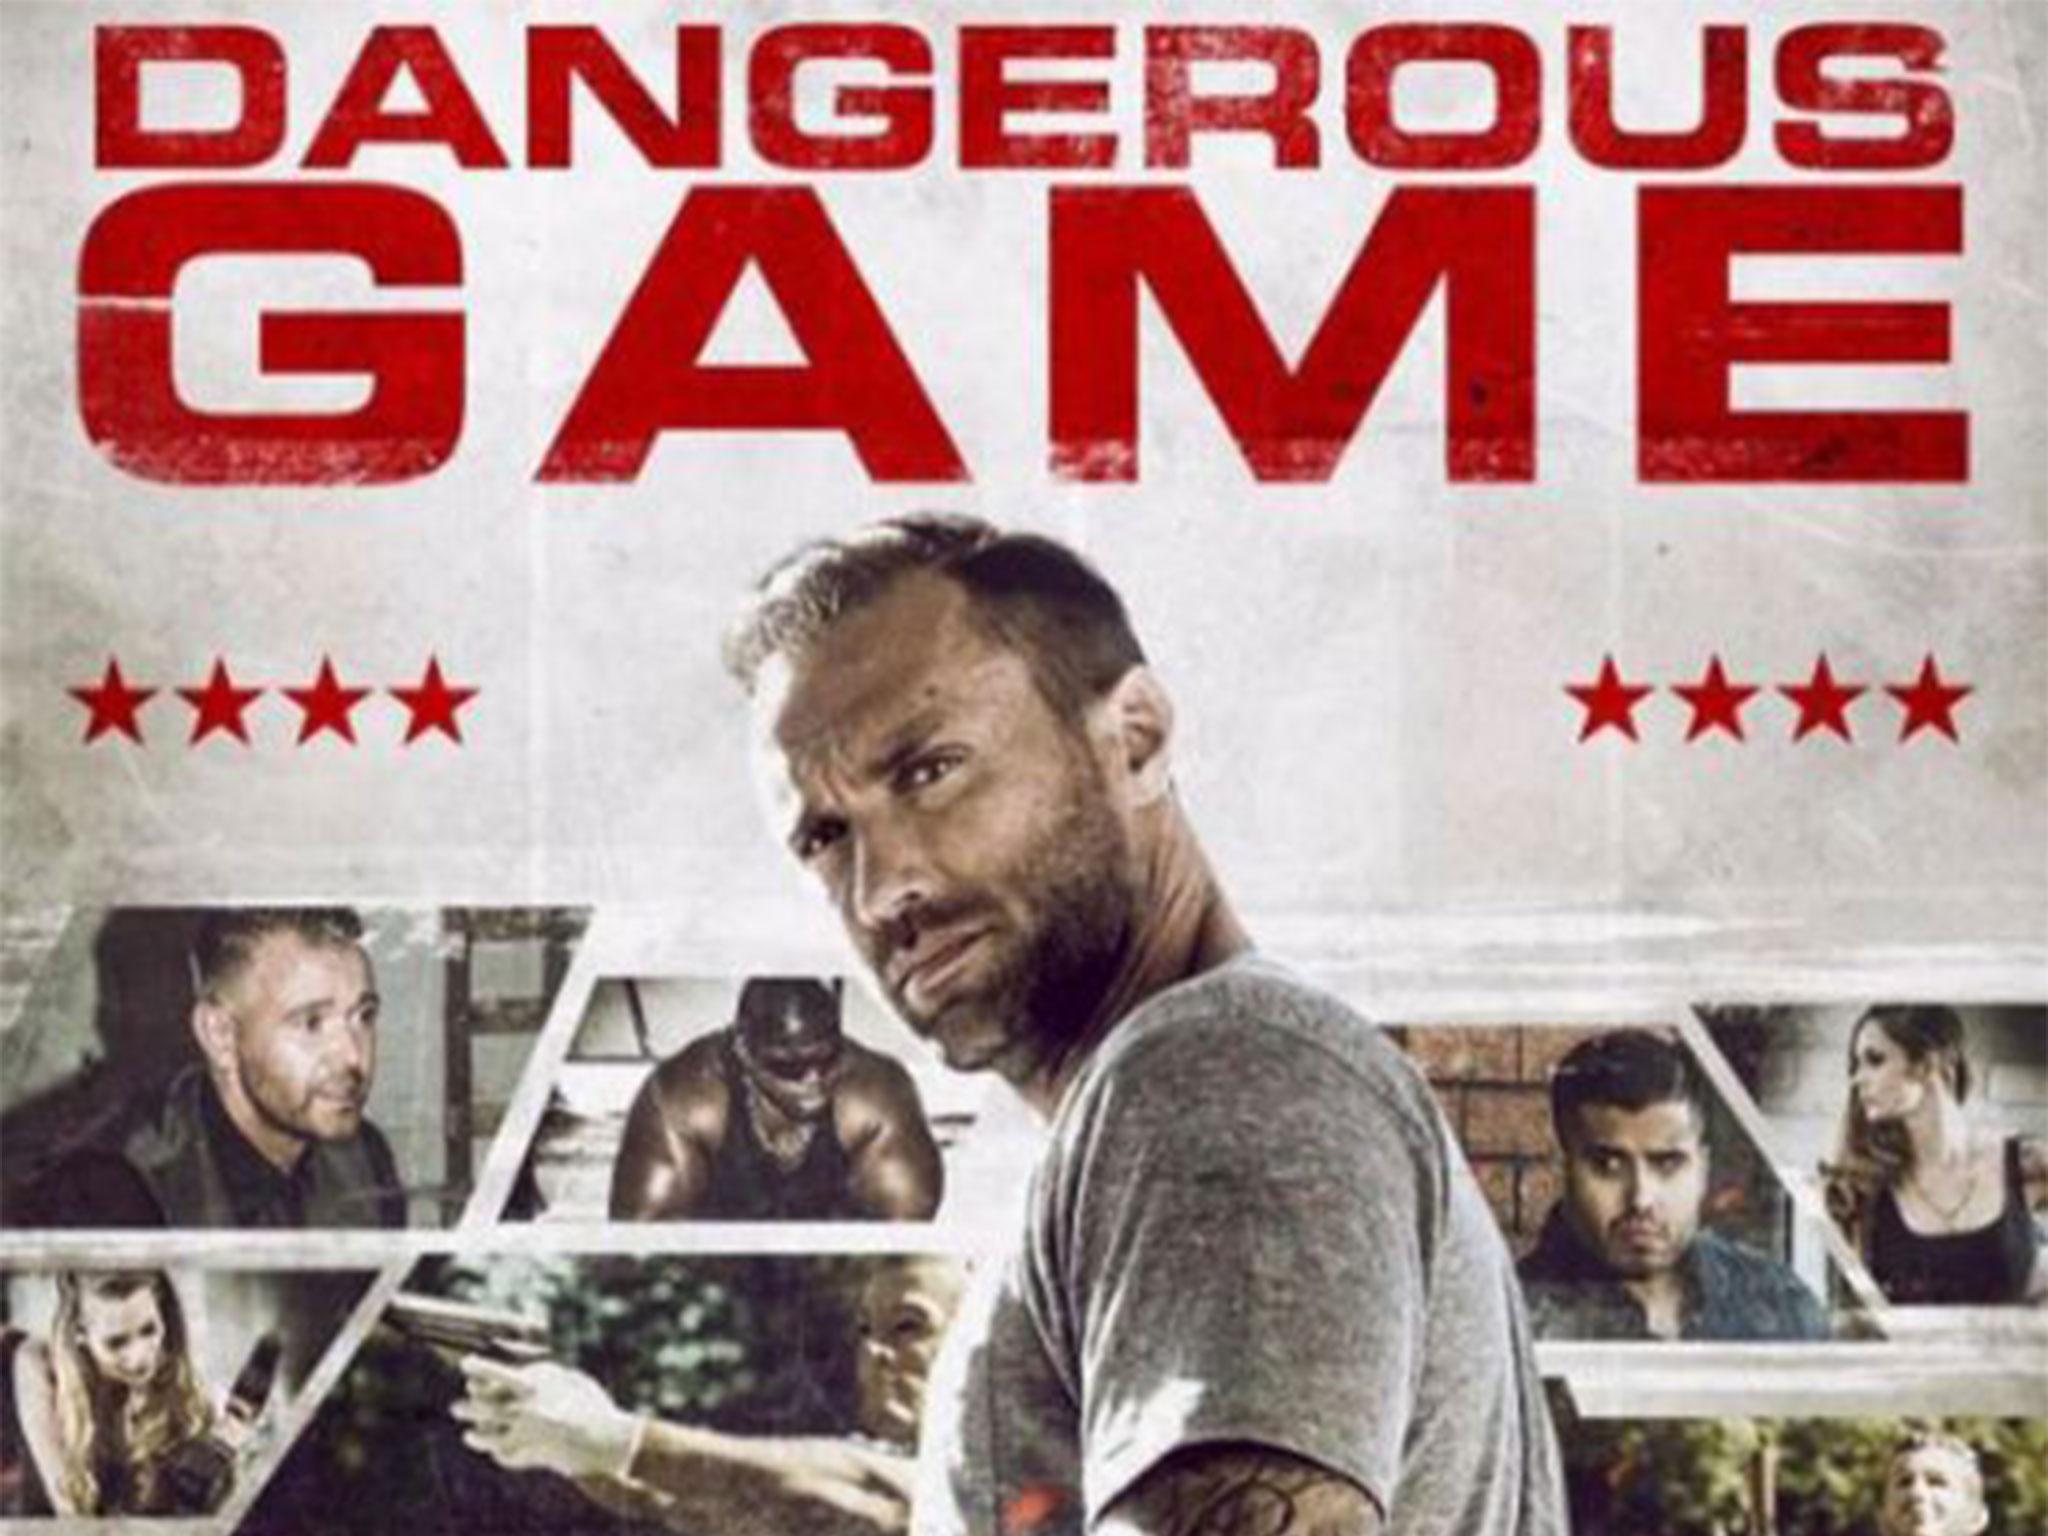 Dangerous Game stars Calum Best, Alex Reid, Lucy Pinder, Darren Day and a guy from TOWIE